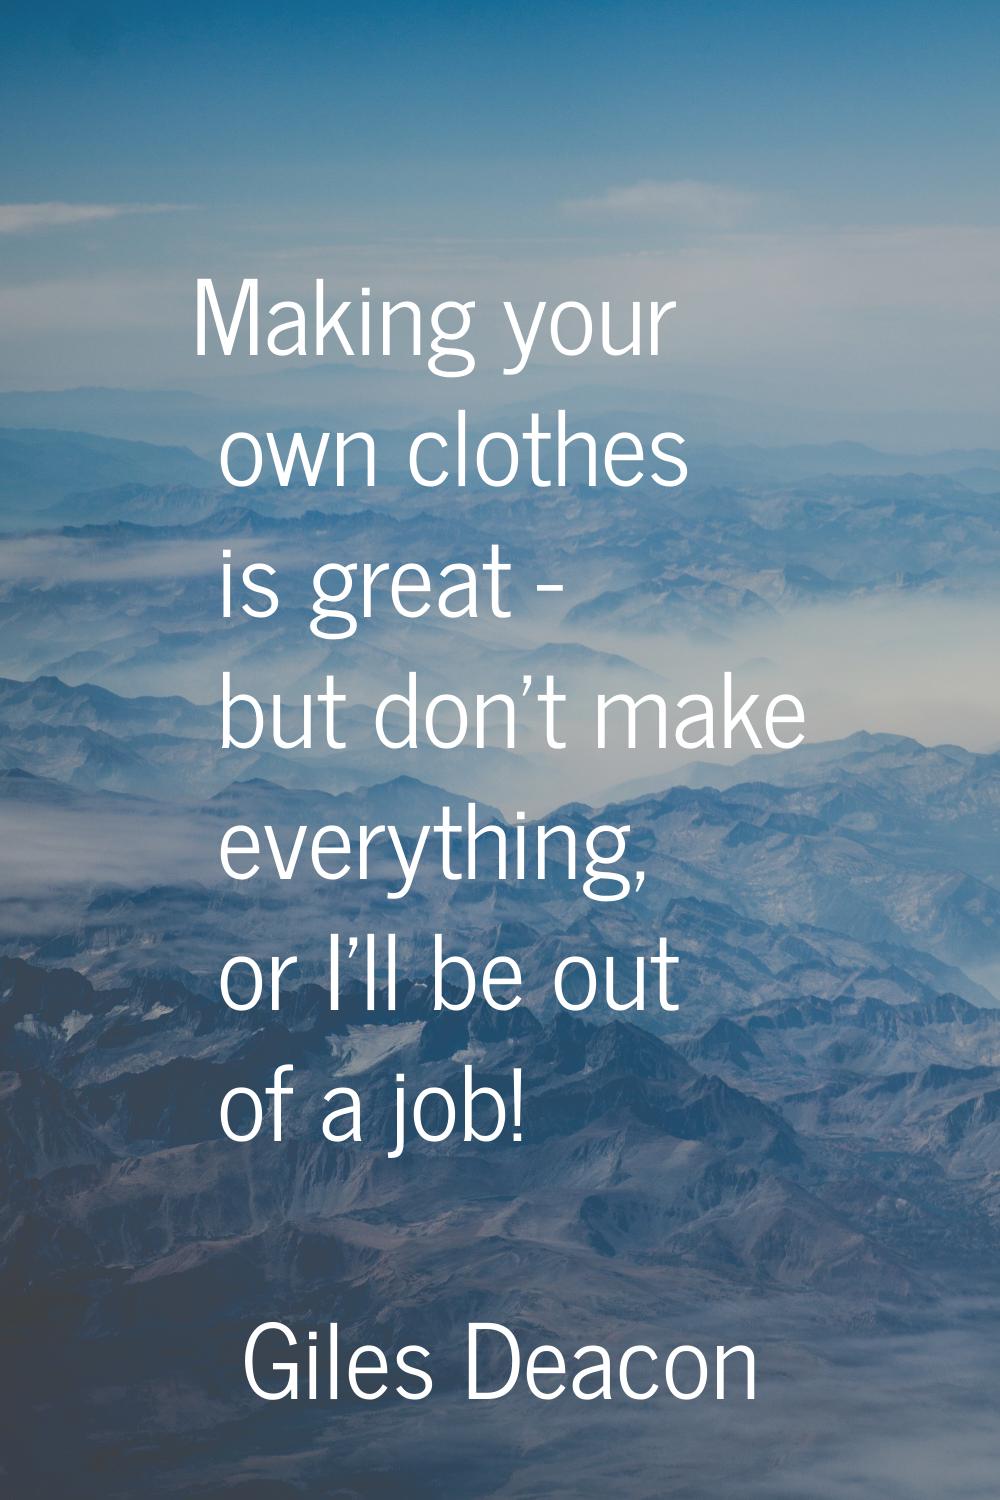 Making your own clothes is great - but don't make everything, or I'll be out of a job!